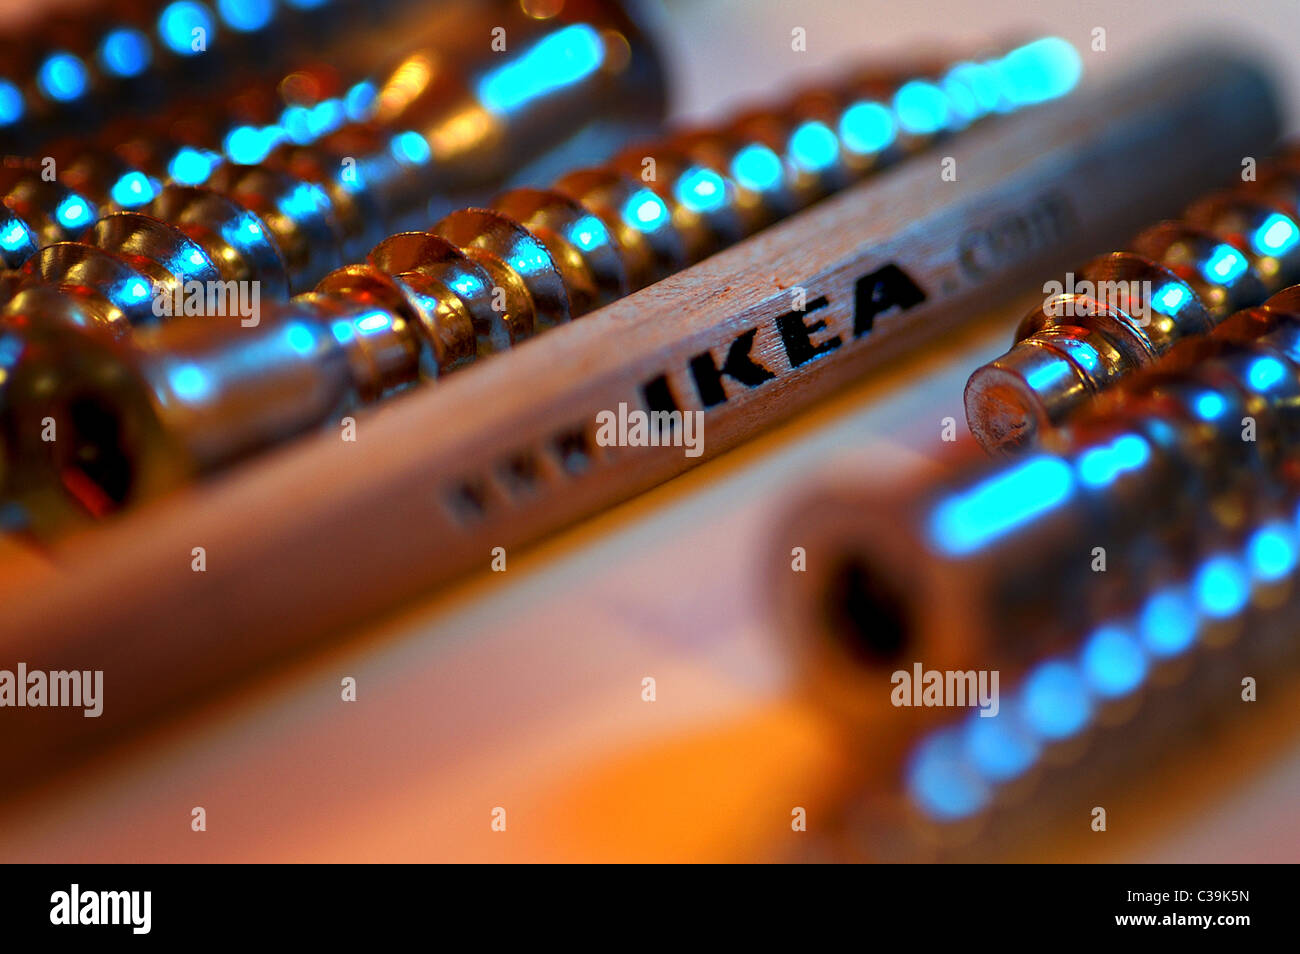 Close-up of Ikea tools and parts used for self assembly Stock Photo - Alamy